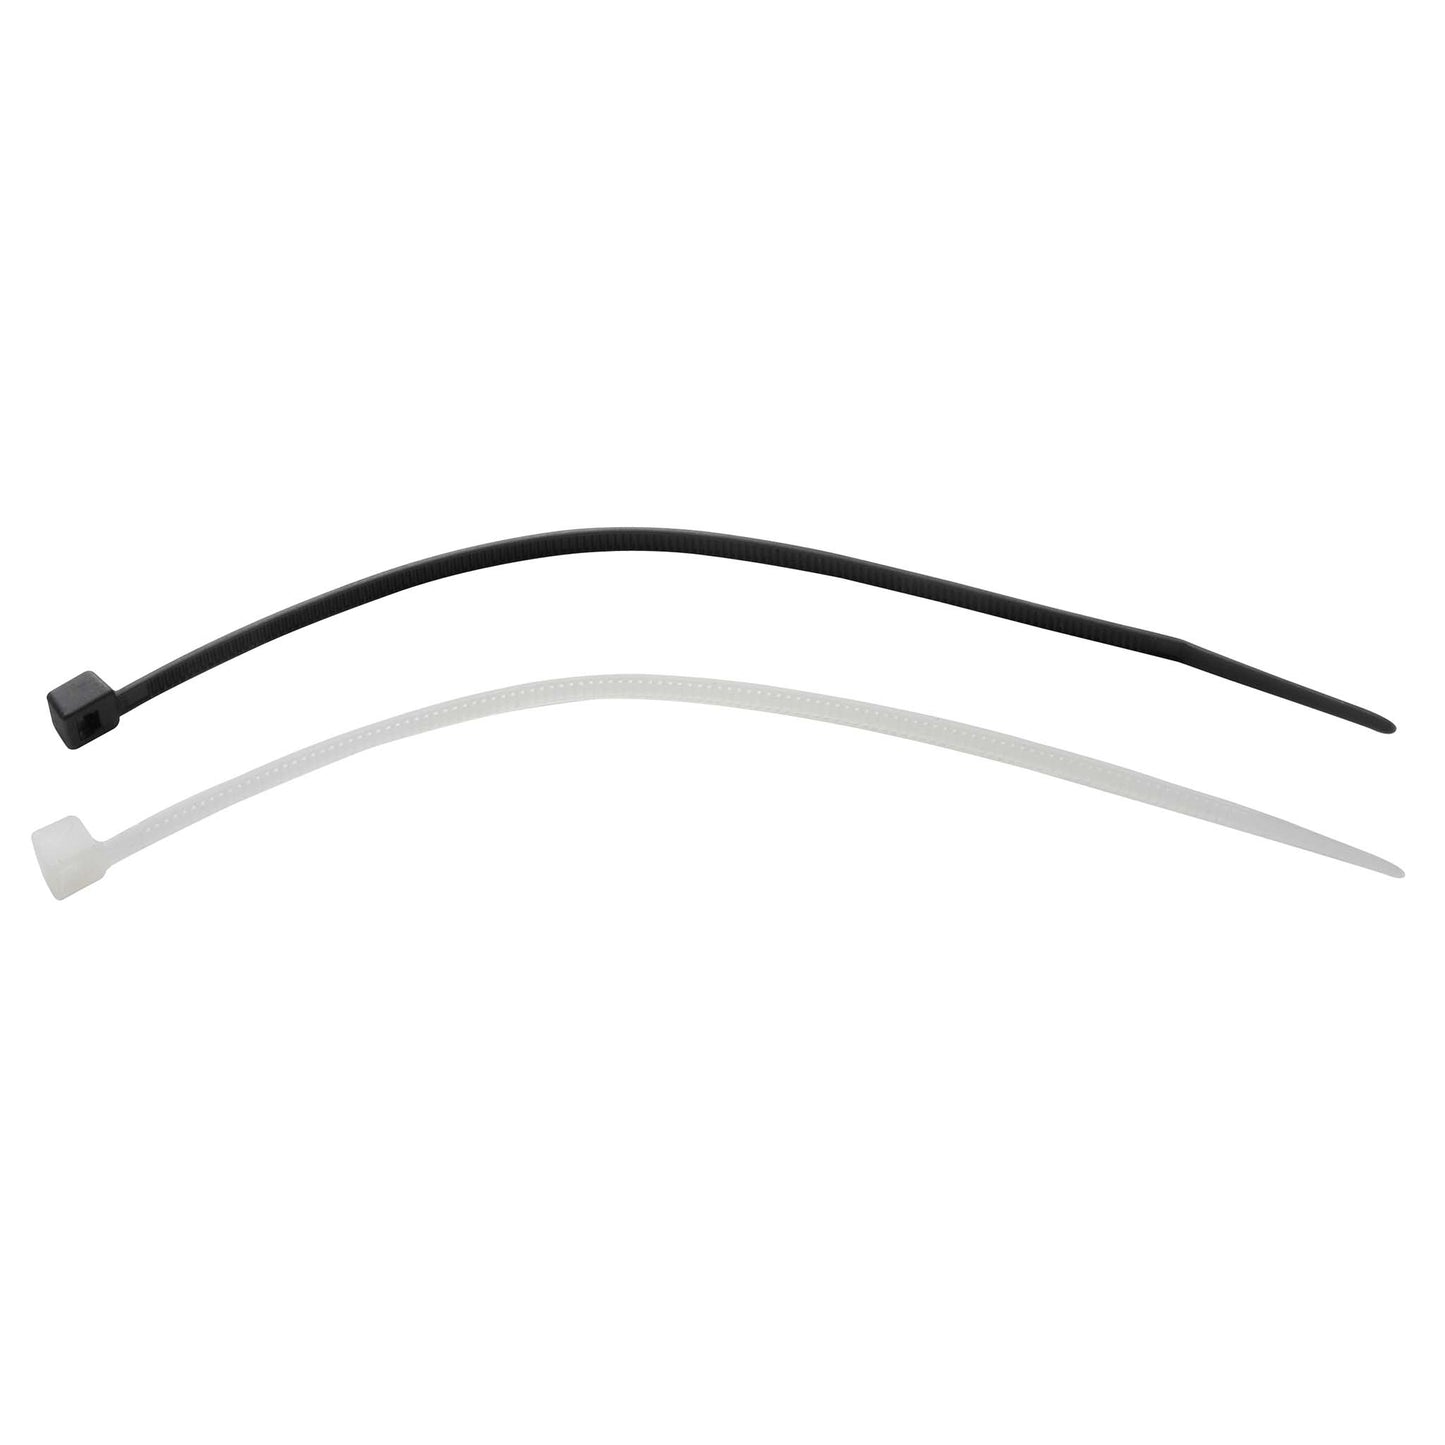 Cable ties 360 x 4.8 mm - black